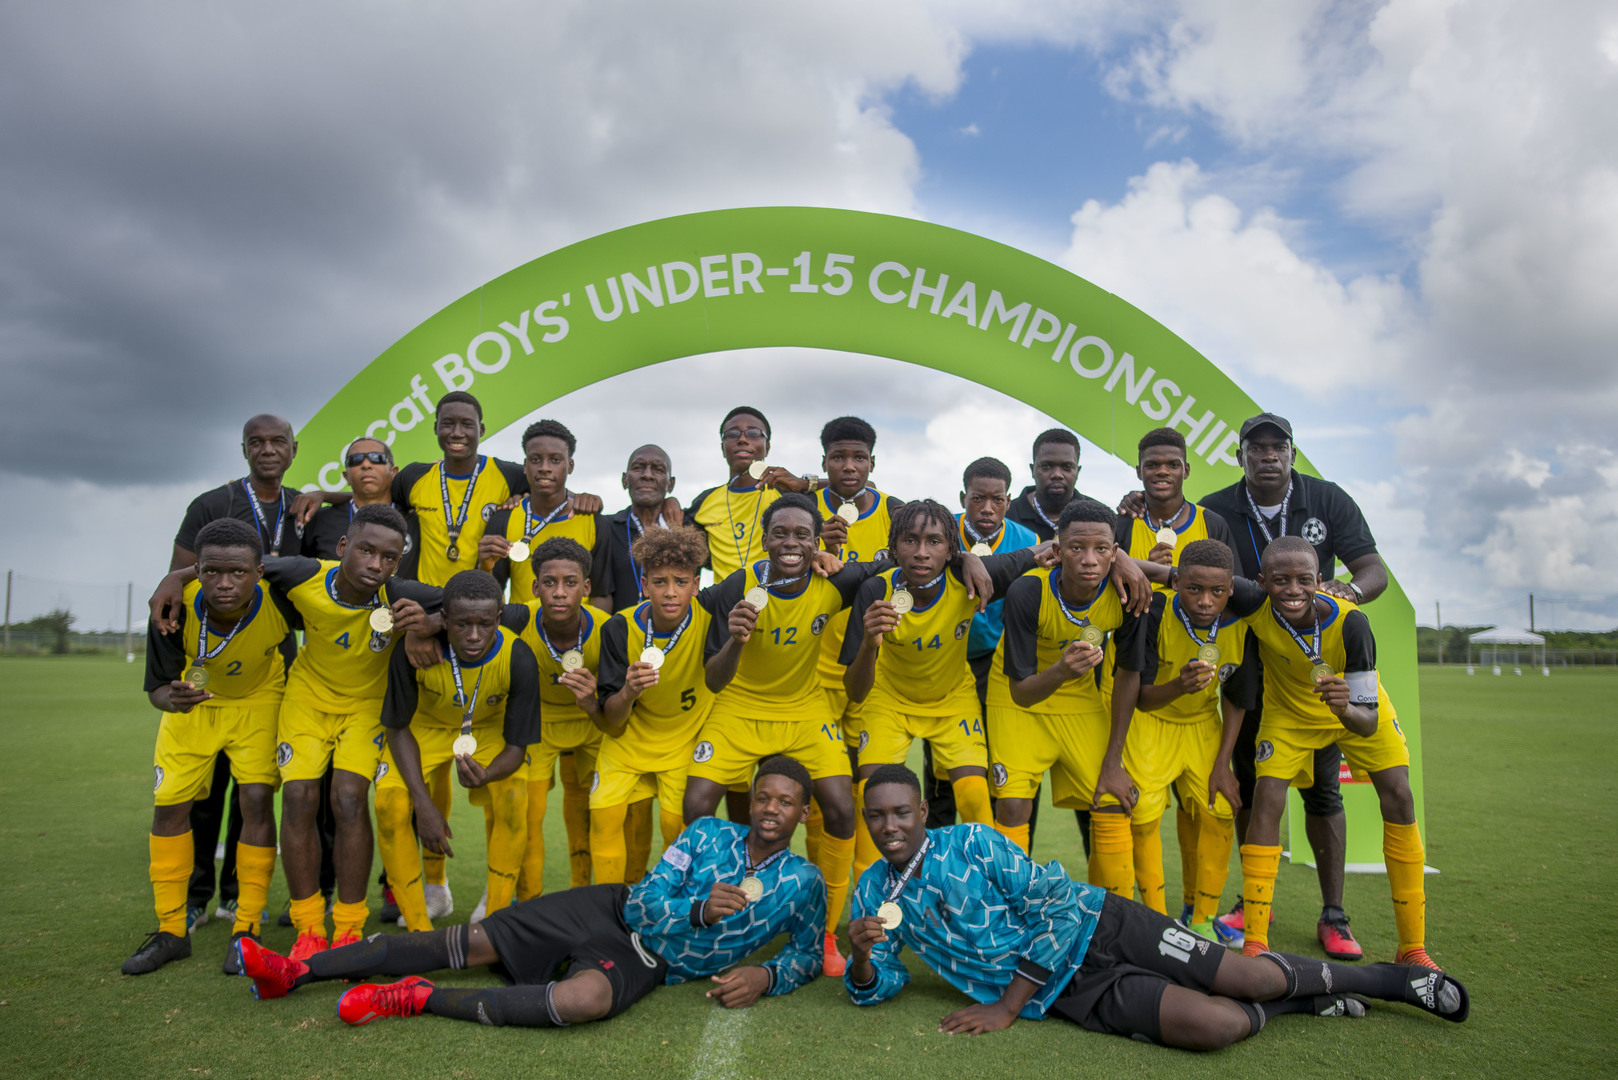 Concacaf announces groups and match schedule for 2023 Concacaf Boys' U-15  Championship